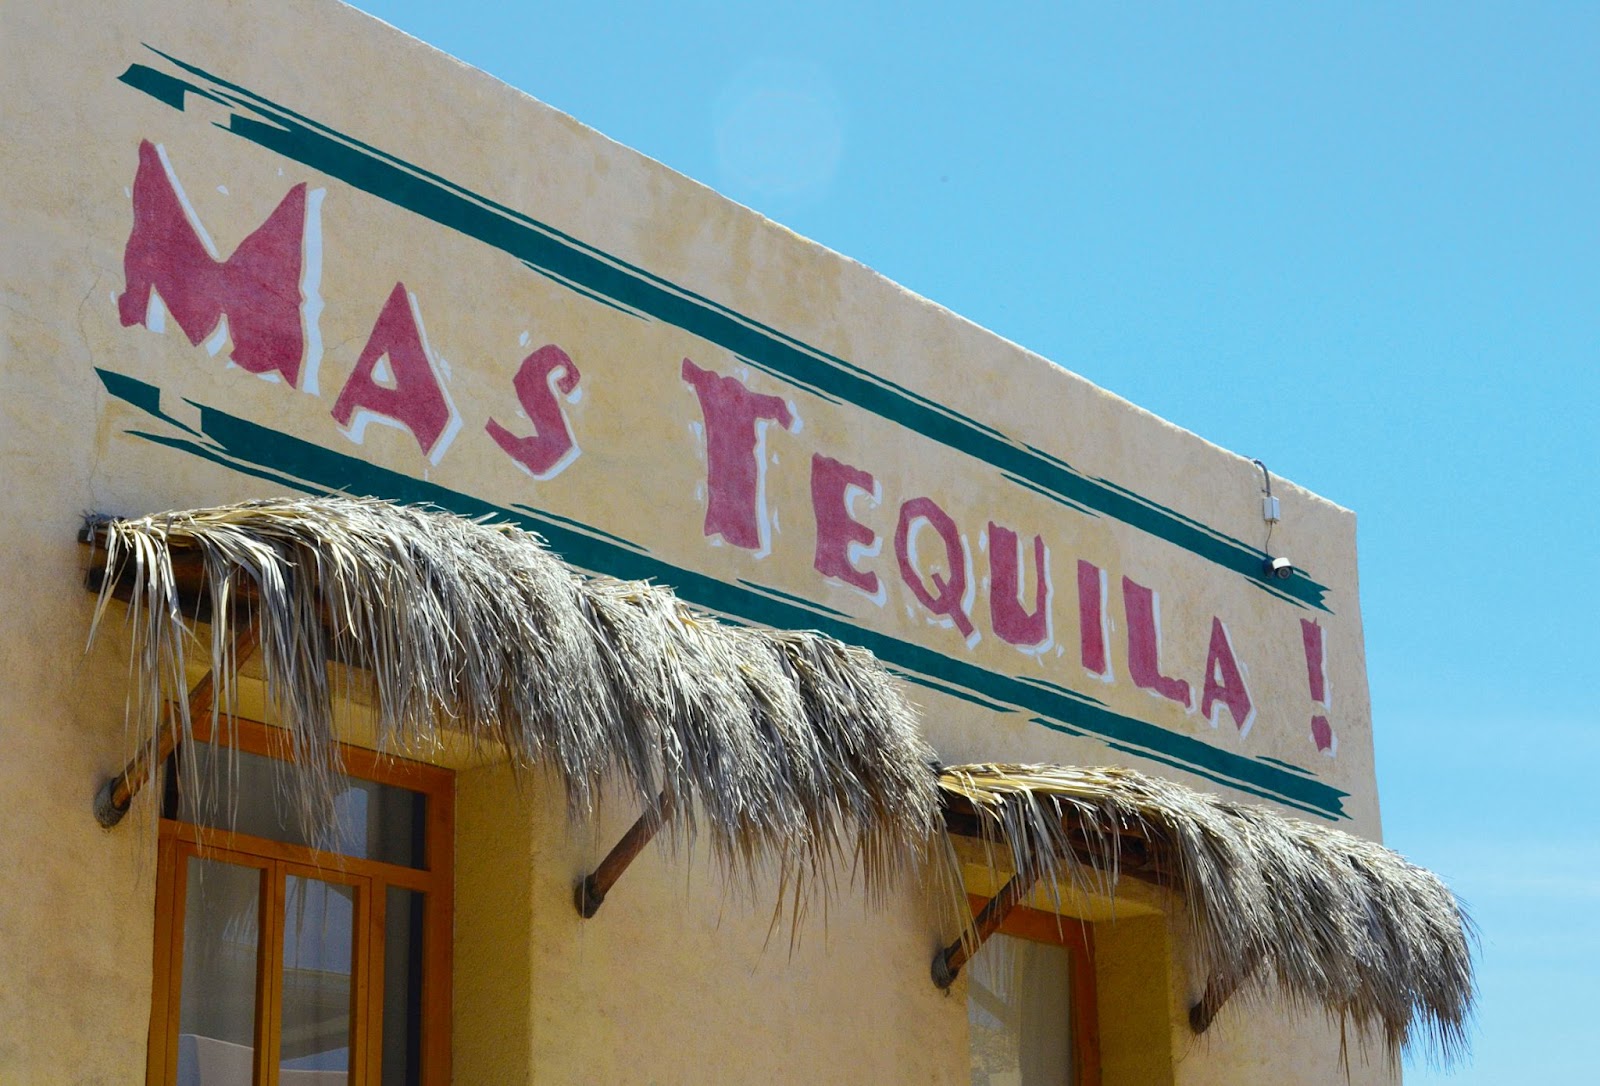 Tequila tours are a very popular excursion for travelers coming to Cabo in May.
pictured: a building with the term "more tequila" on it in Cabo